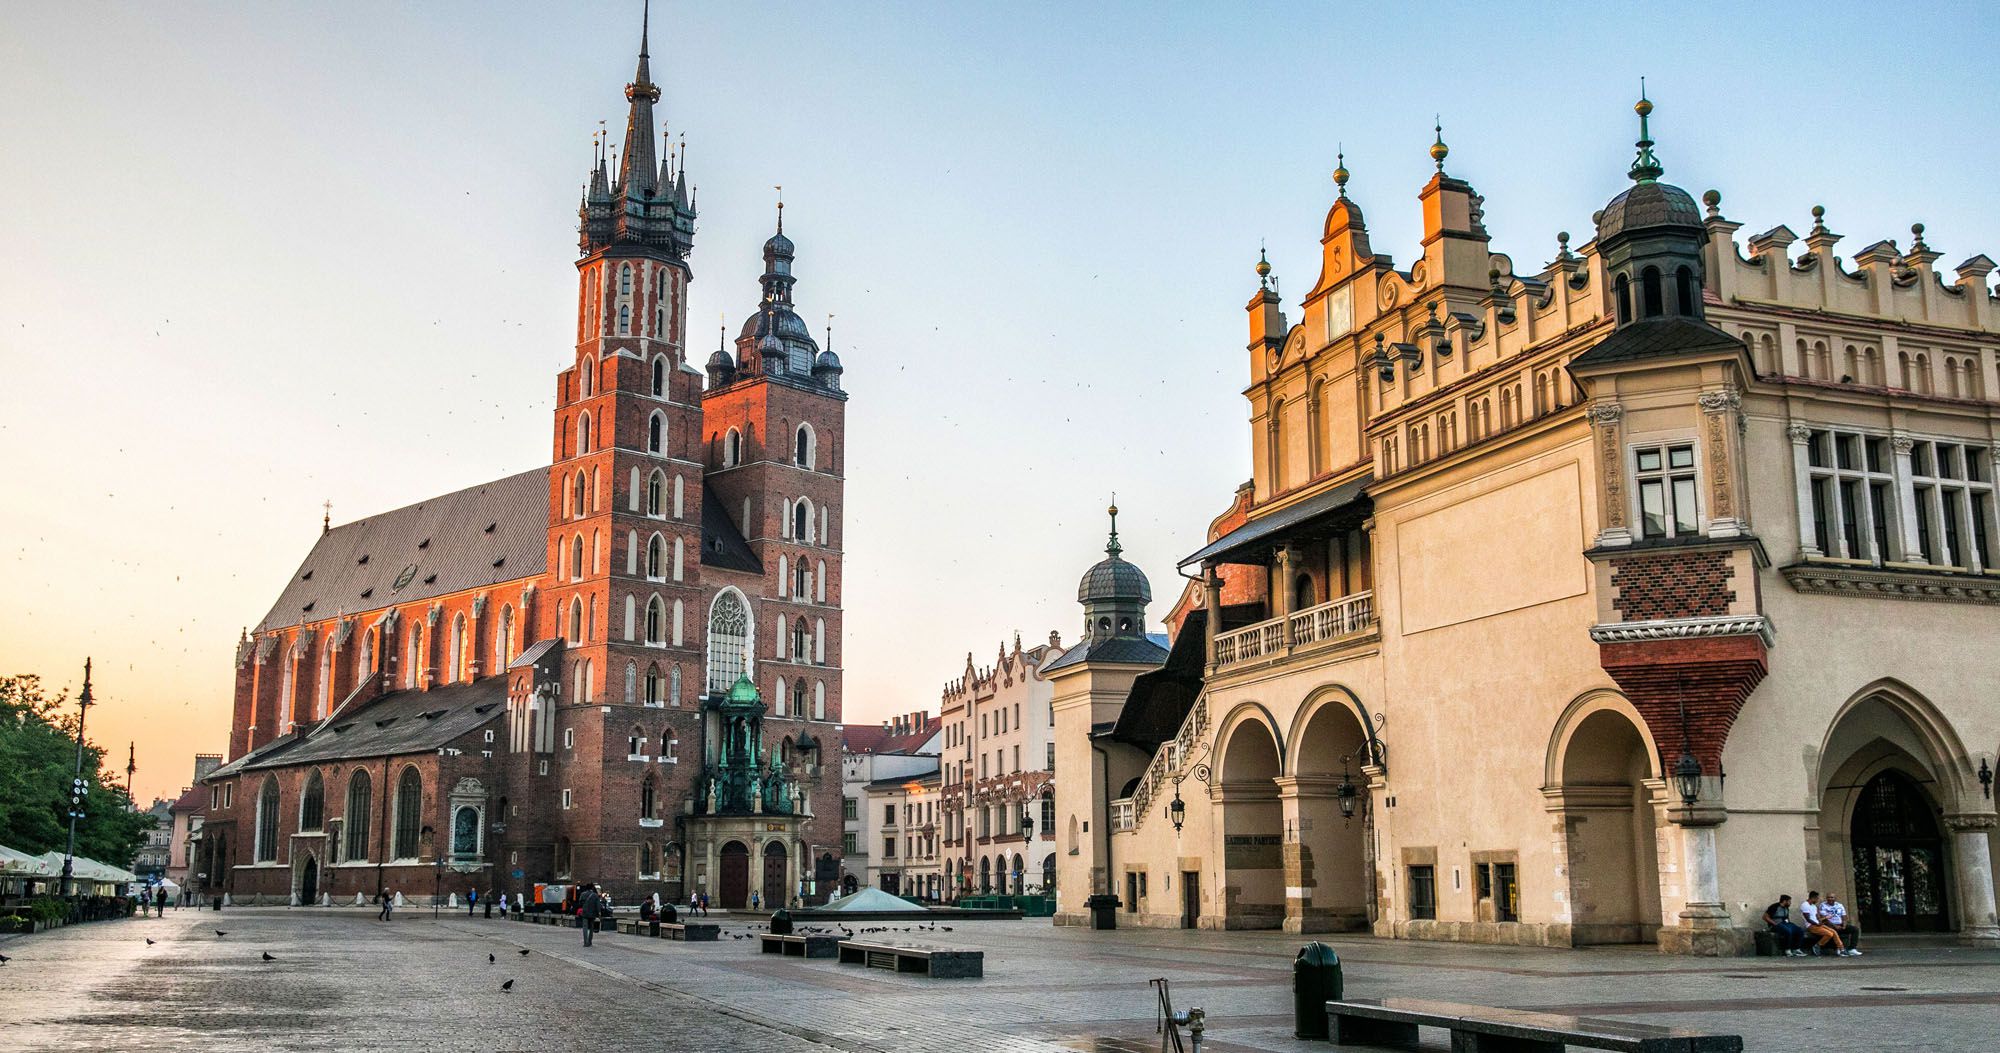 PolandTour Packages - Book honeymoon ,family,adventure tour packages to Poland|Travel Knits